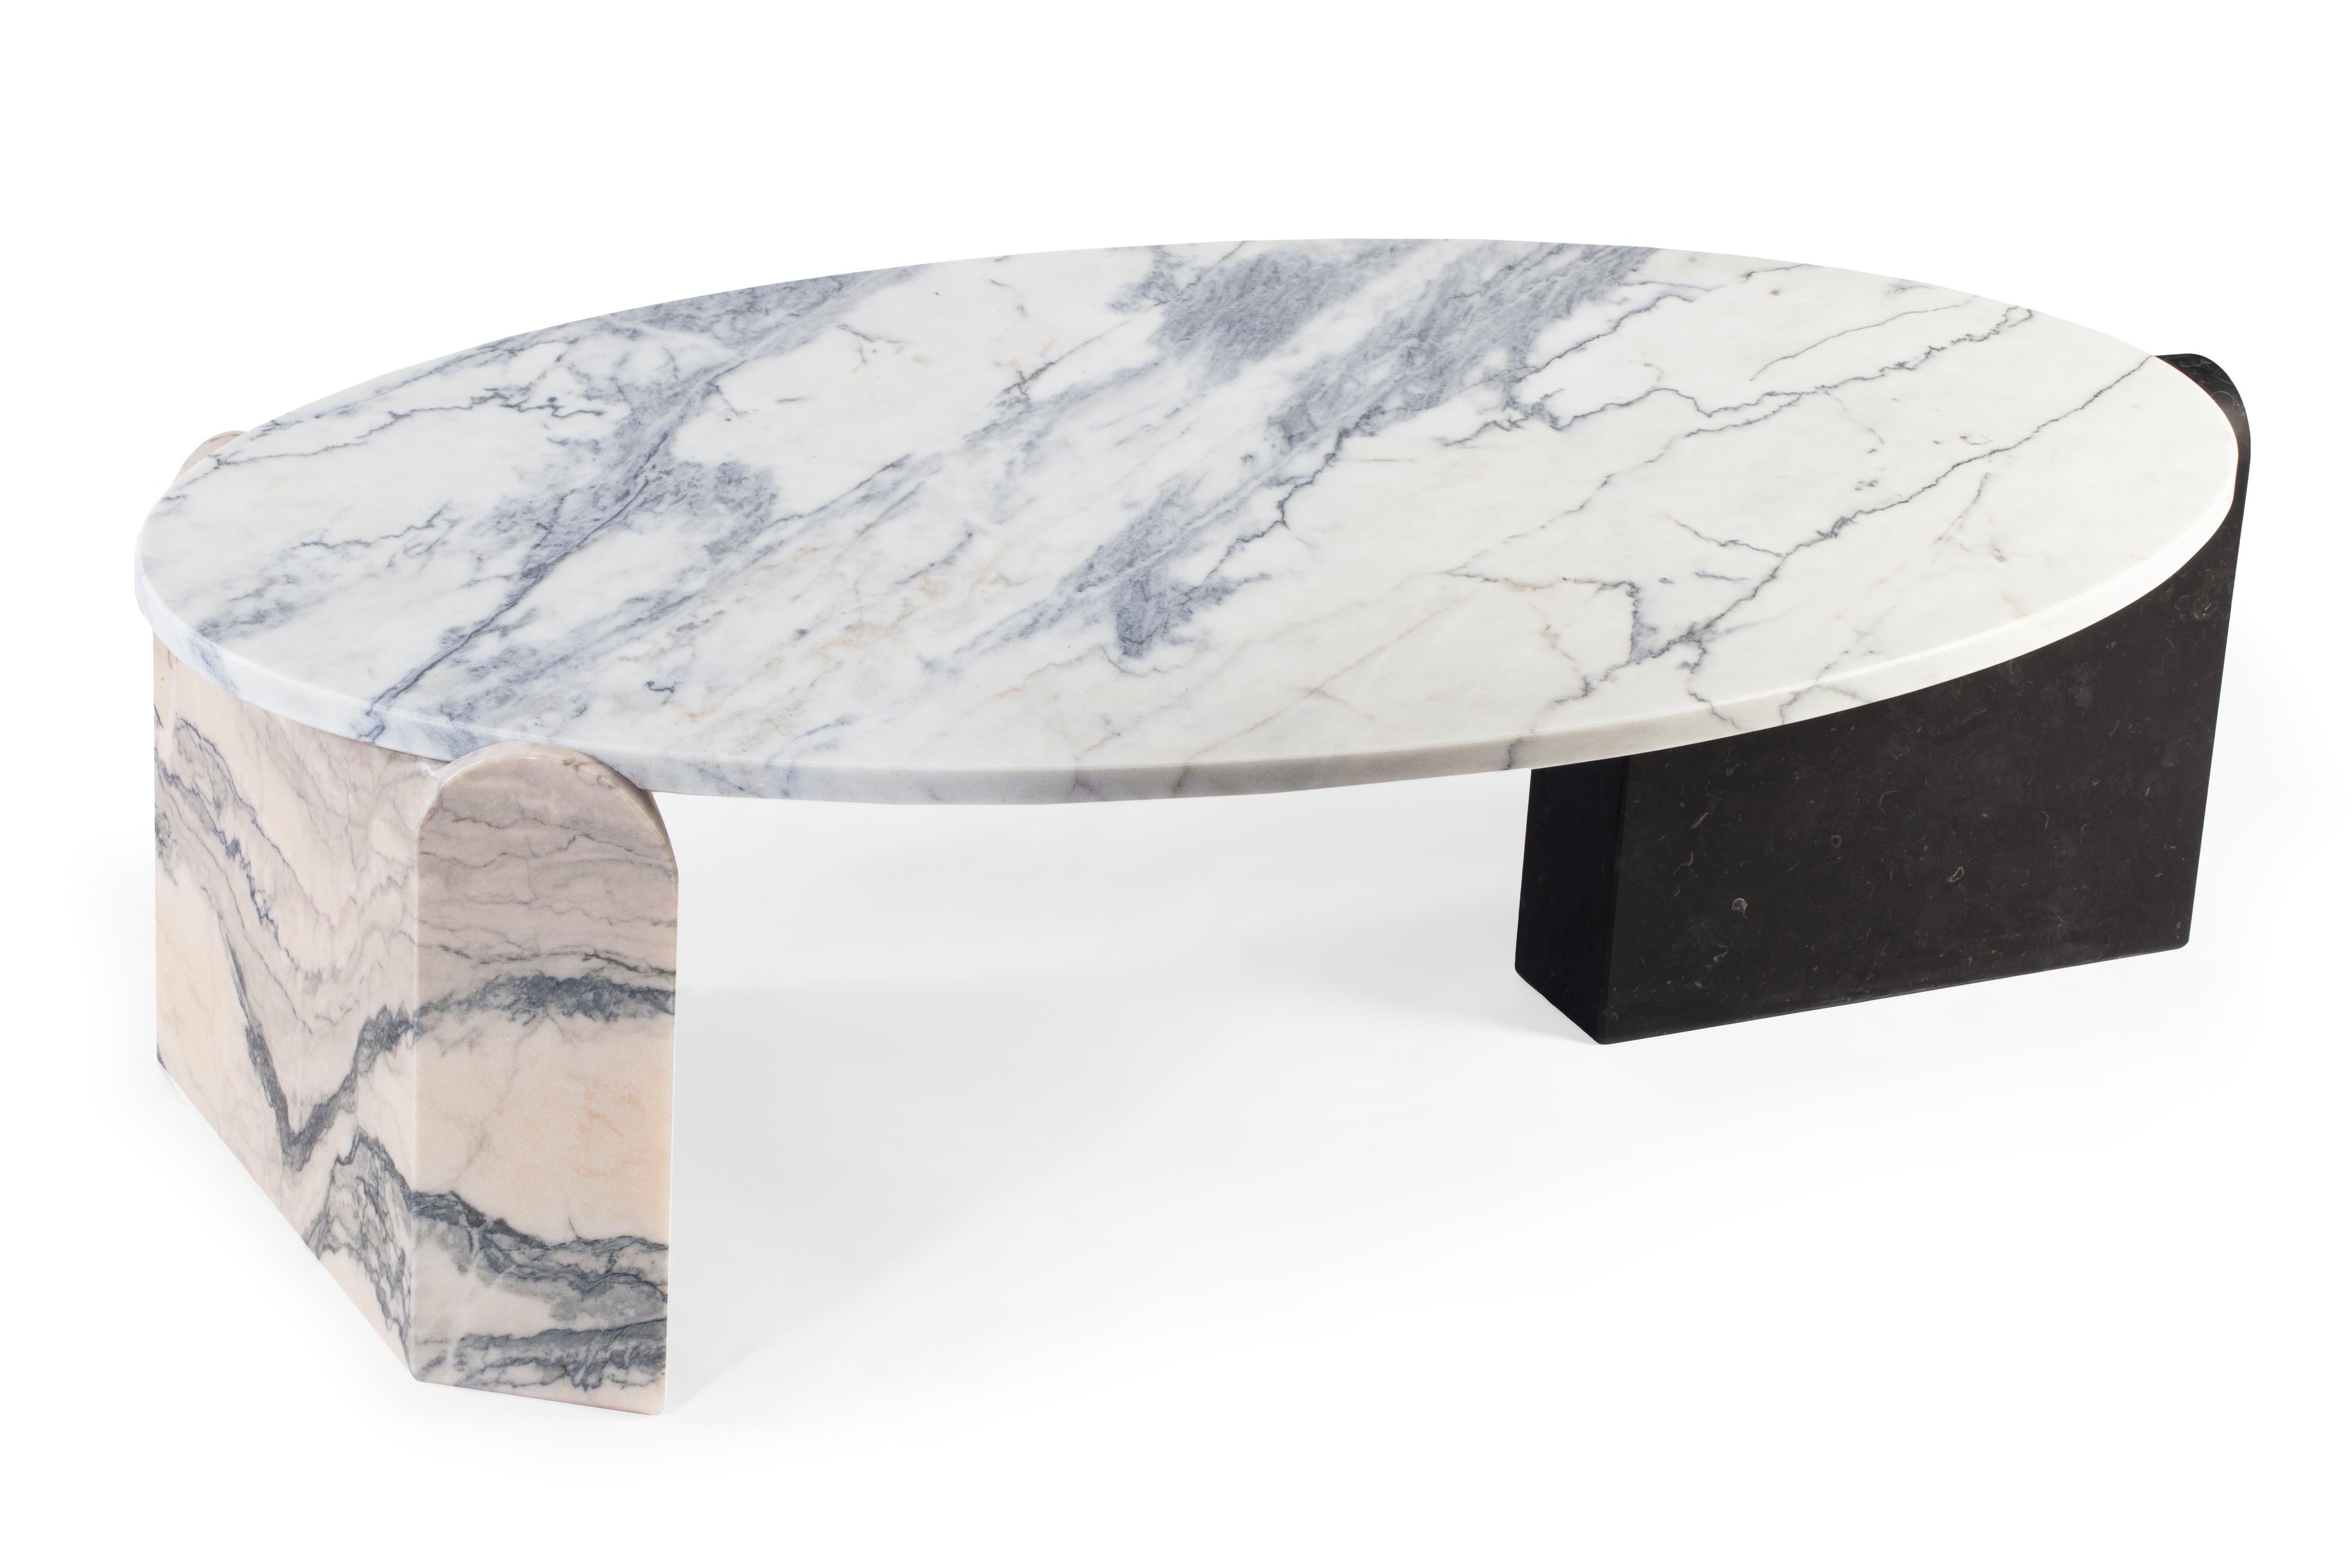 Marble contemporary jean center table
Dimensions: H 35 x W 120 x D 77 cm
Materials: Top: nero marquina; verde guatemala; extremoz rosa; extremoz
 Right base: Nero marquina; extremoz rosa; extremoz
 Left base: Nero marquina; extremoz rosa;